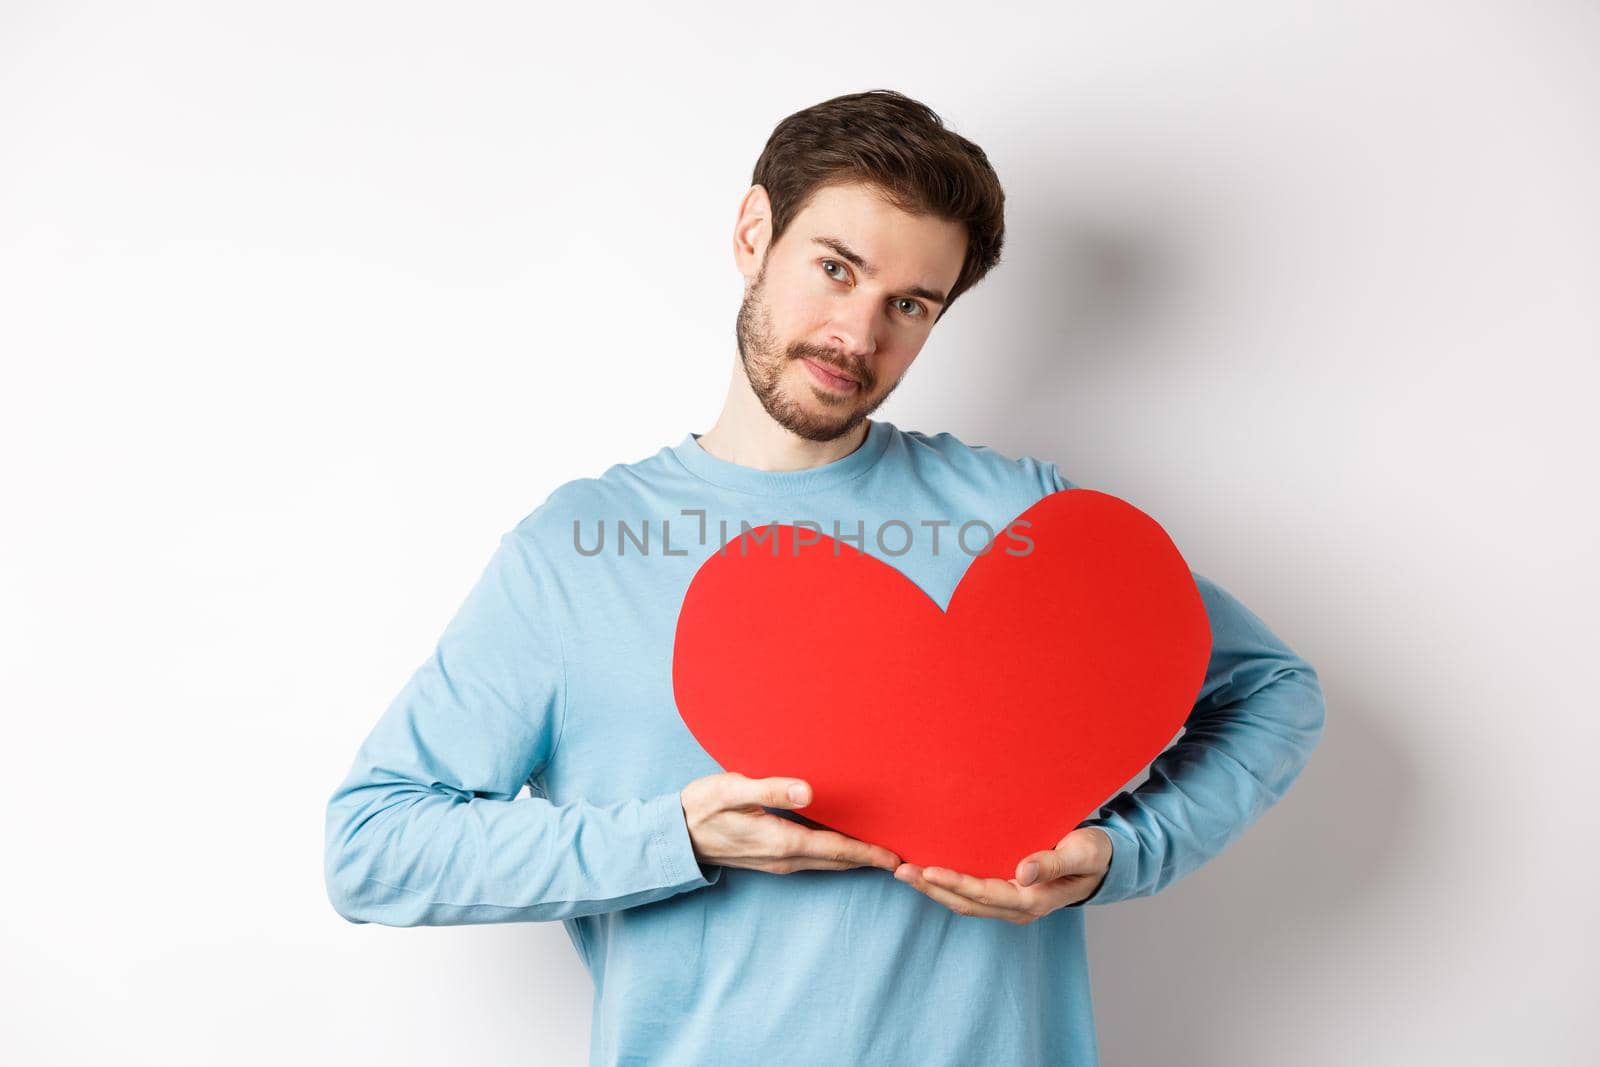 Romantic boyfriend making Valentines day surprise, holding big red heart cutout on chest and smiling with love, looking tender at camera, standing over white background.